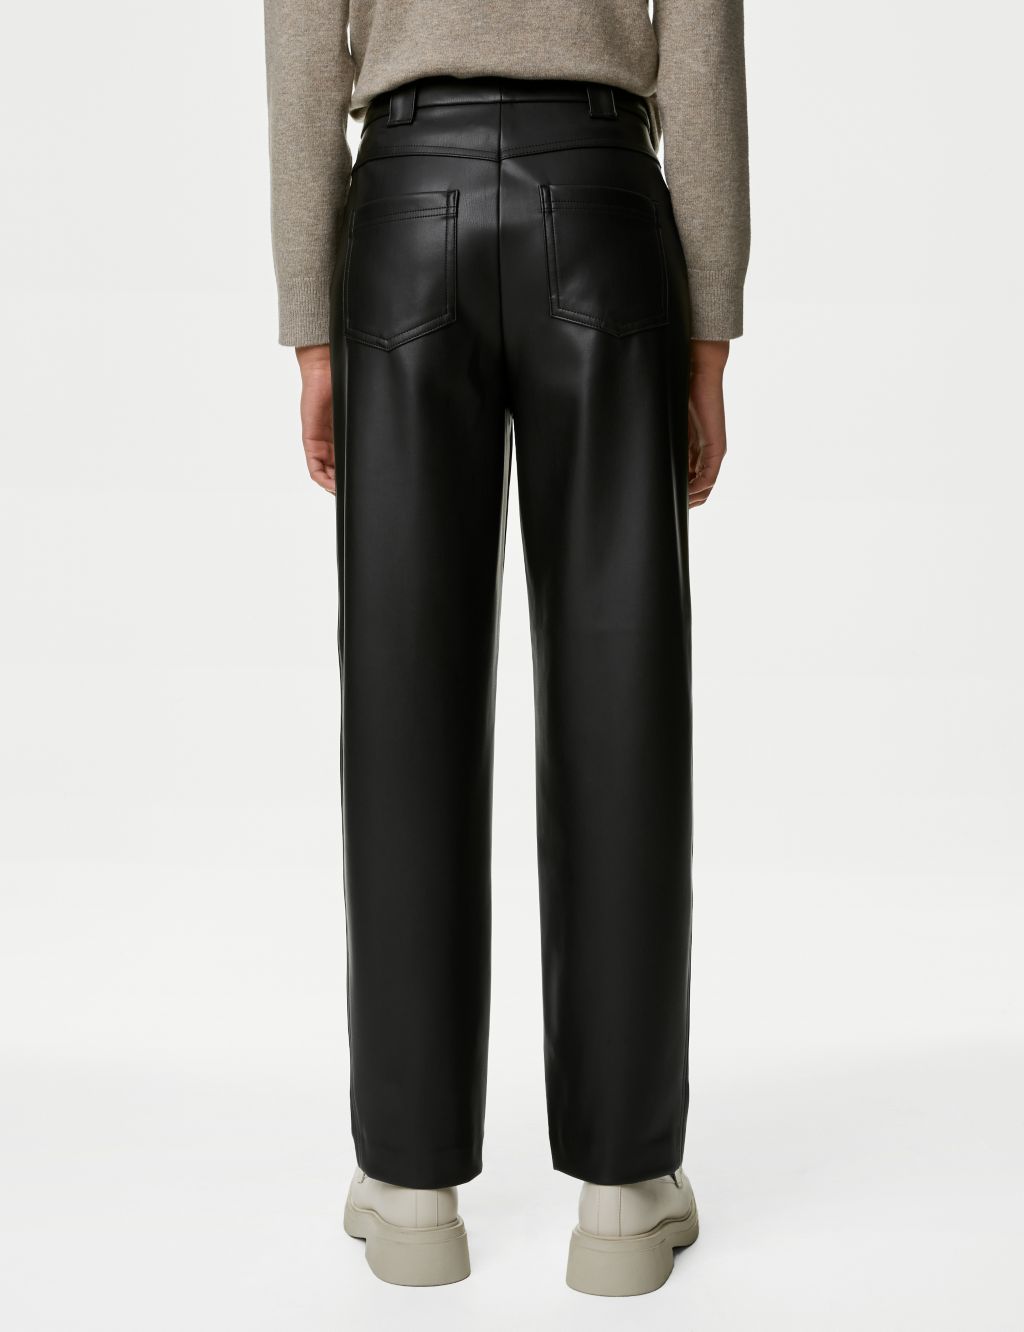 Leather Look Ankle Grazer Trousers image 4